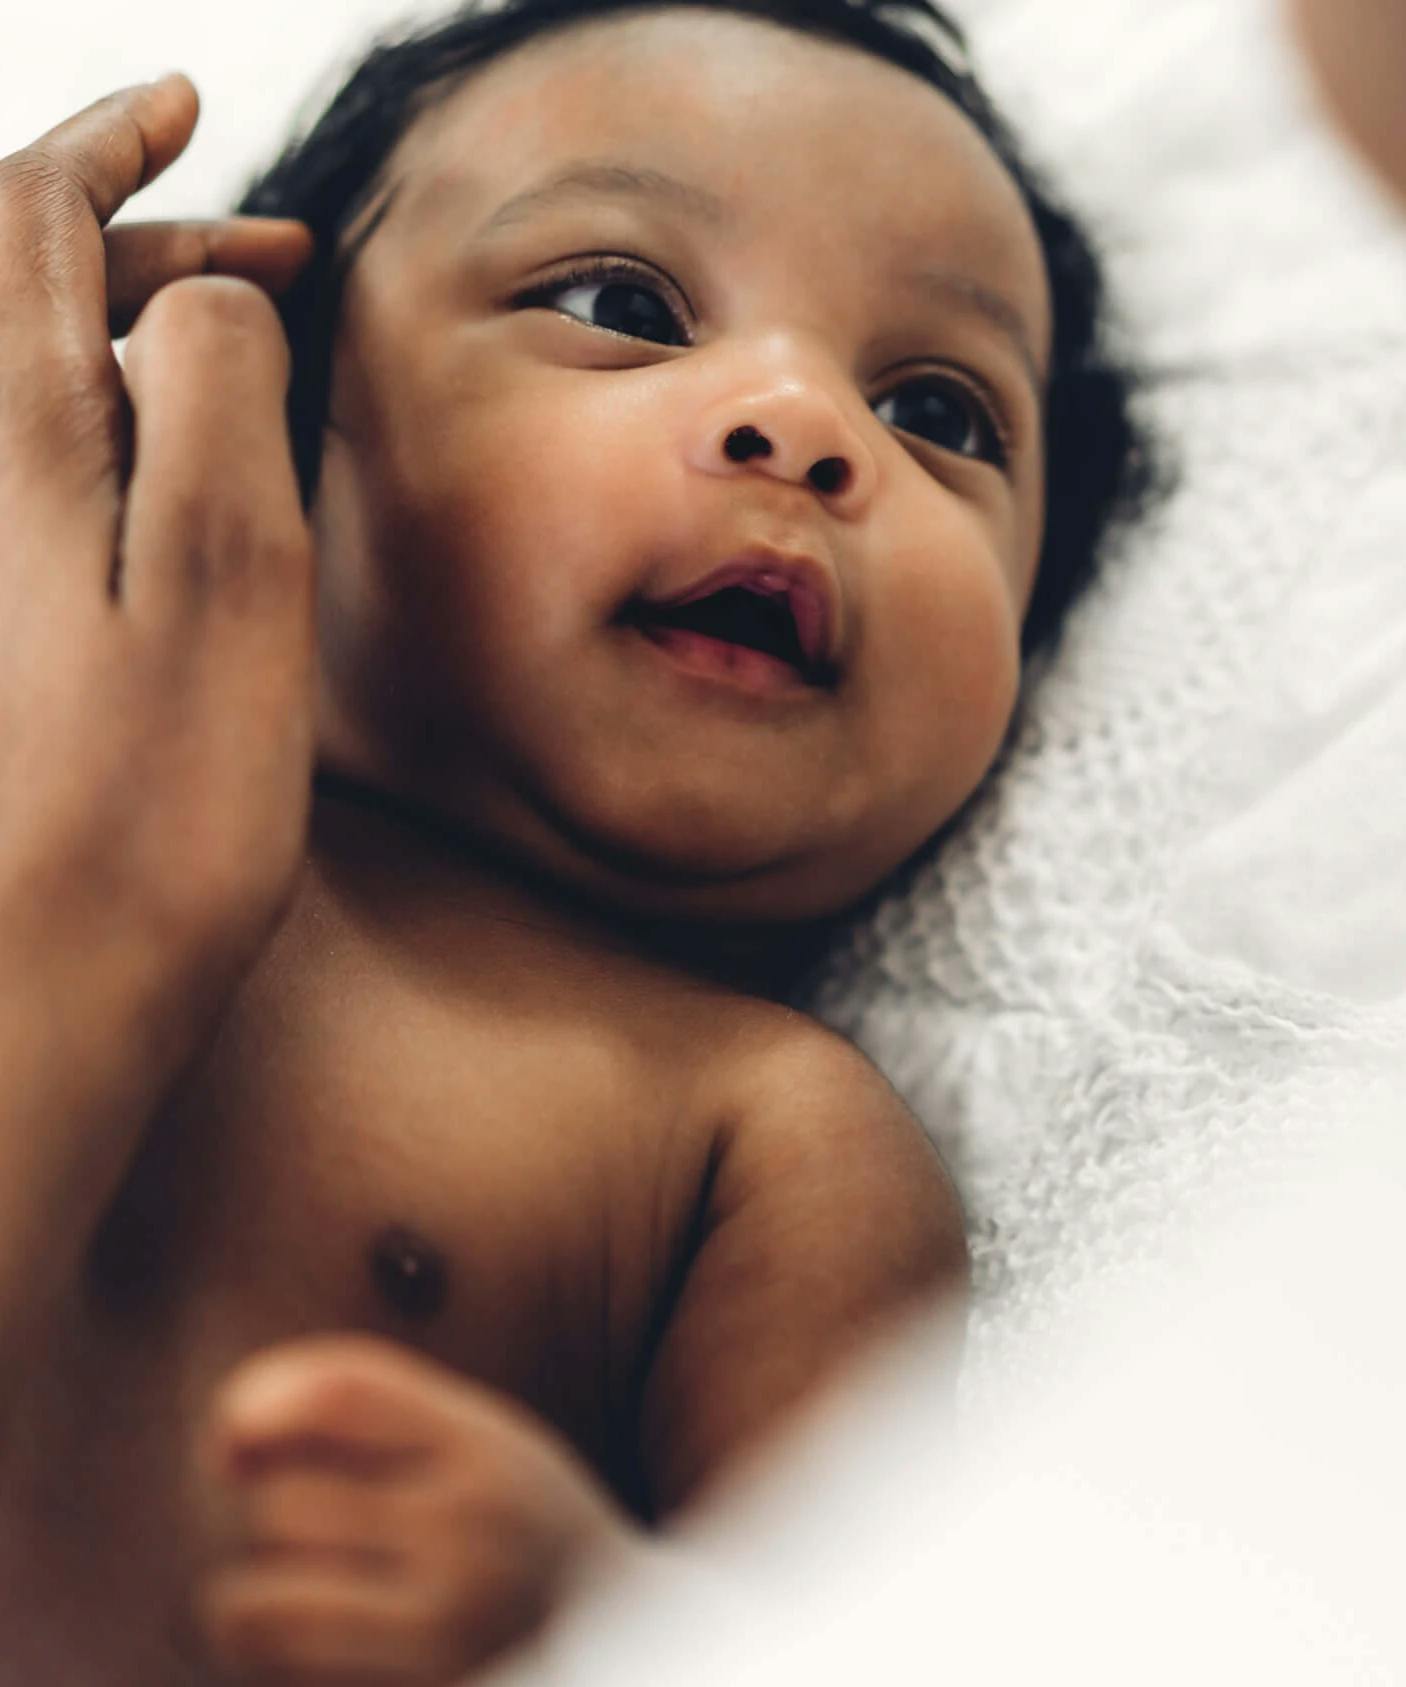 The Scientific Reason Babies Are Entranced By Beautiful Faces